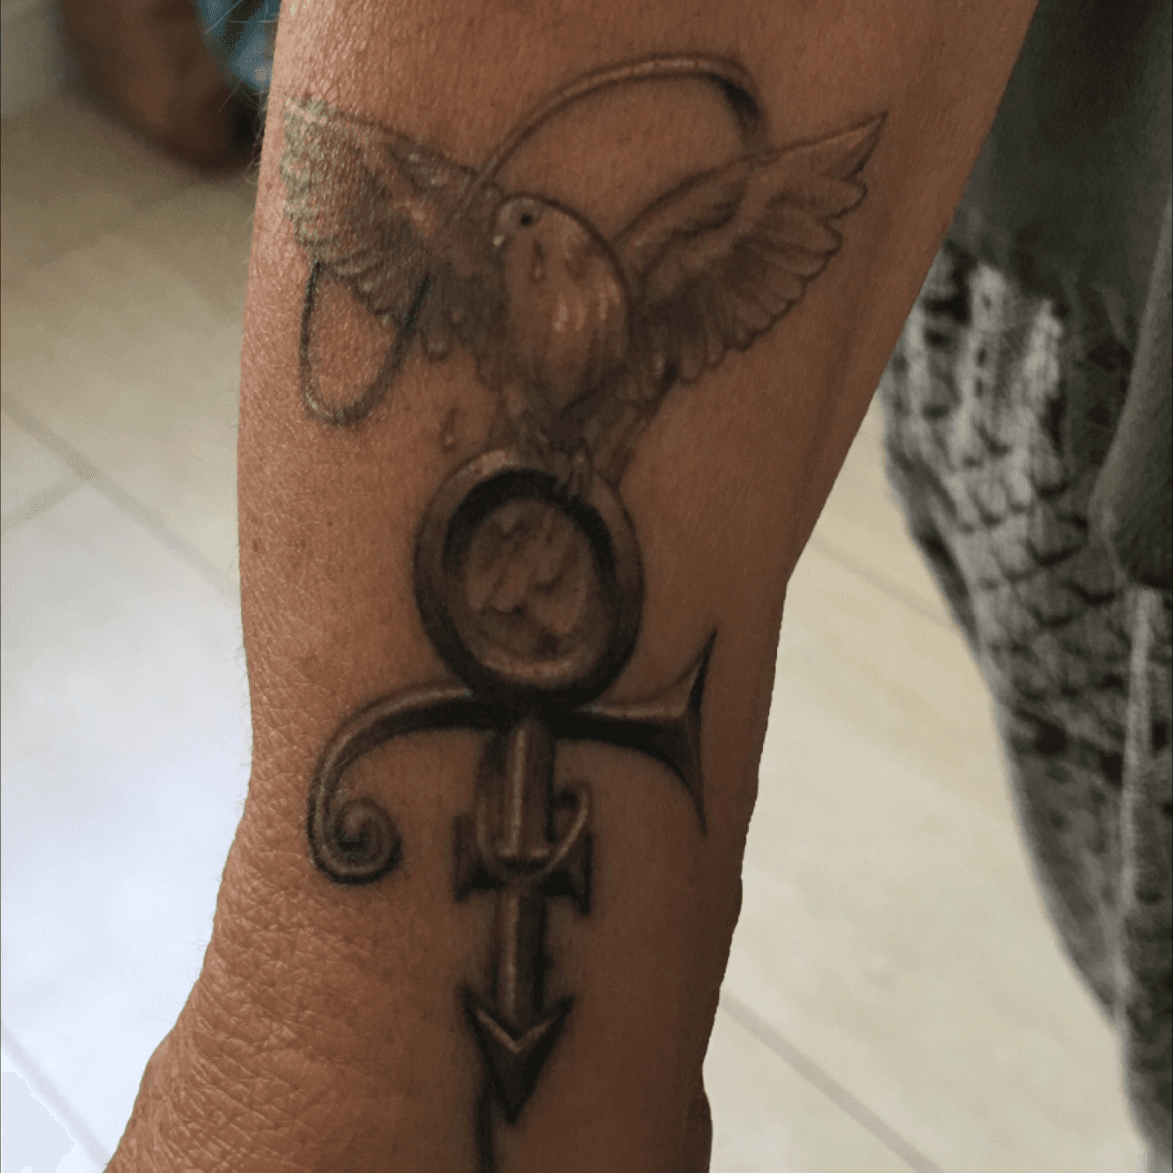 Just got a Prince tattoo today Figured I had to share it here  rPRINCE